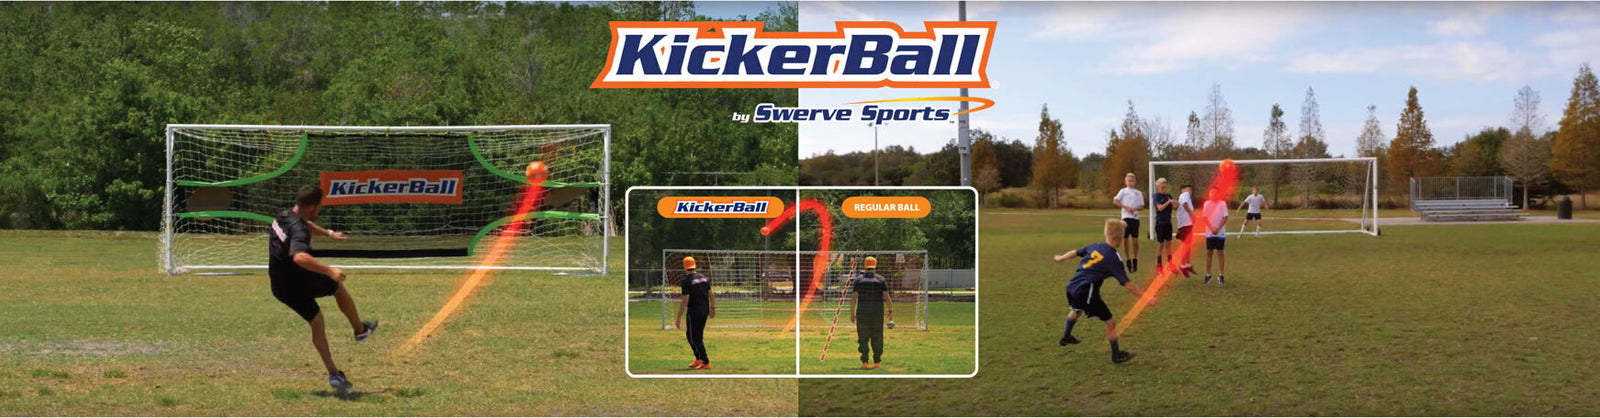 KickerBall – Incredible Inventions